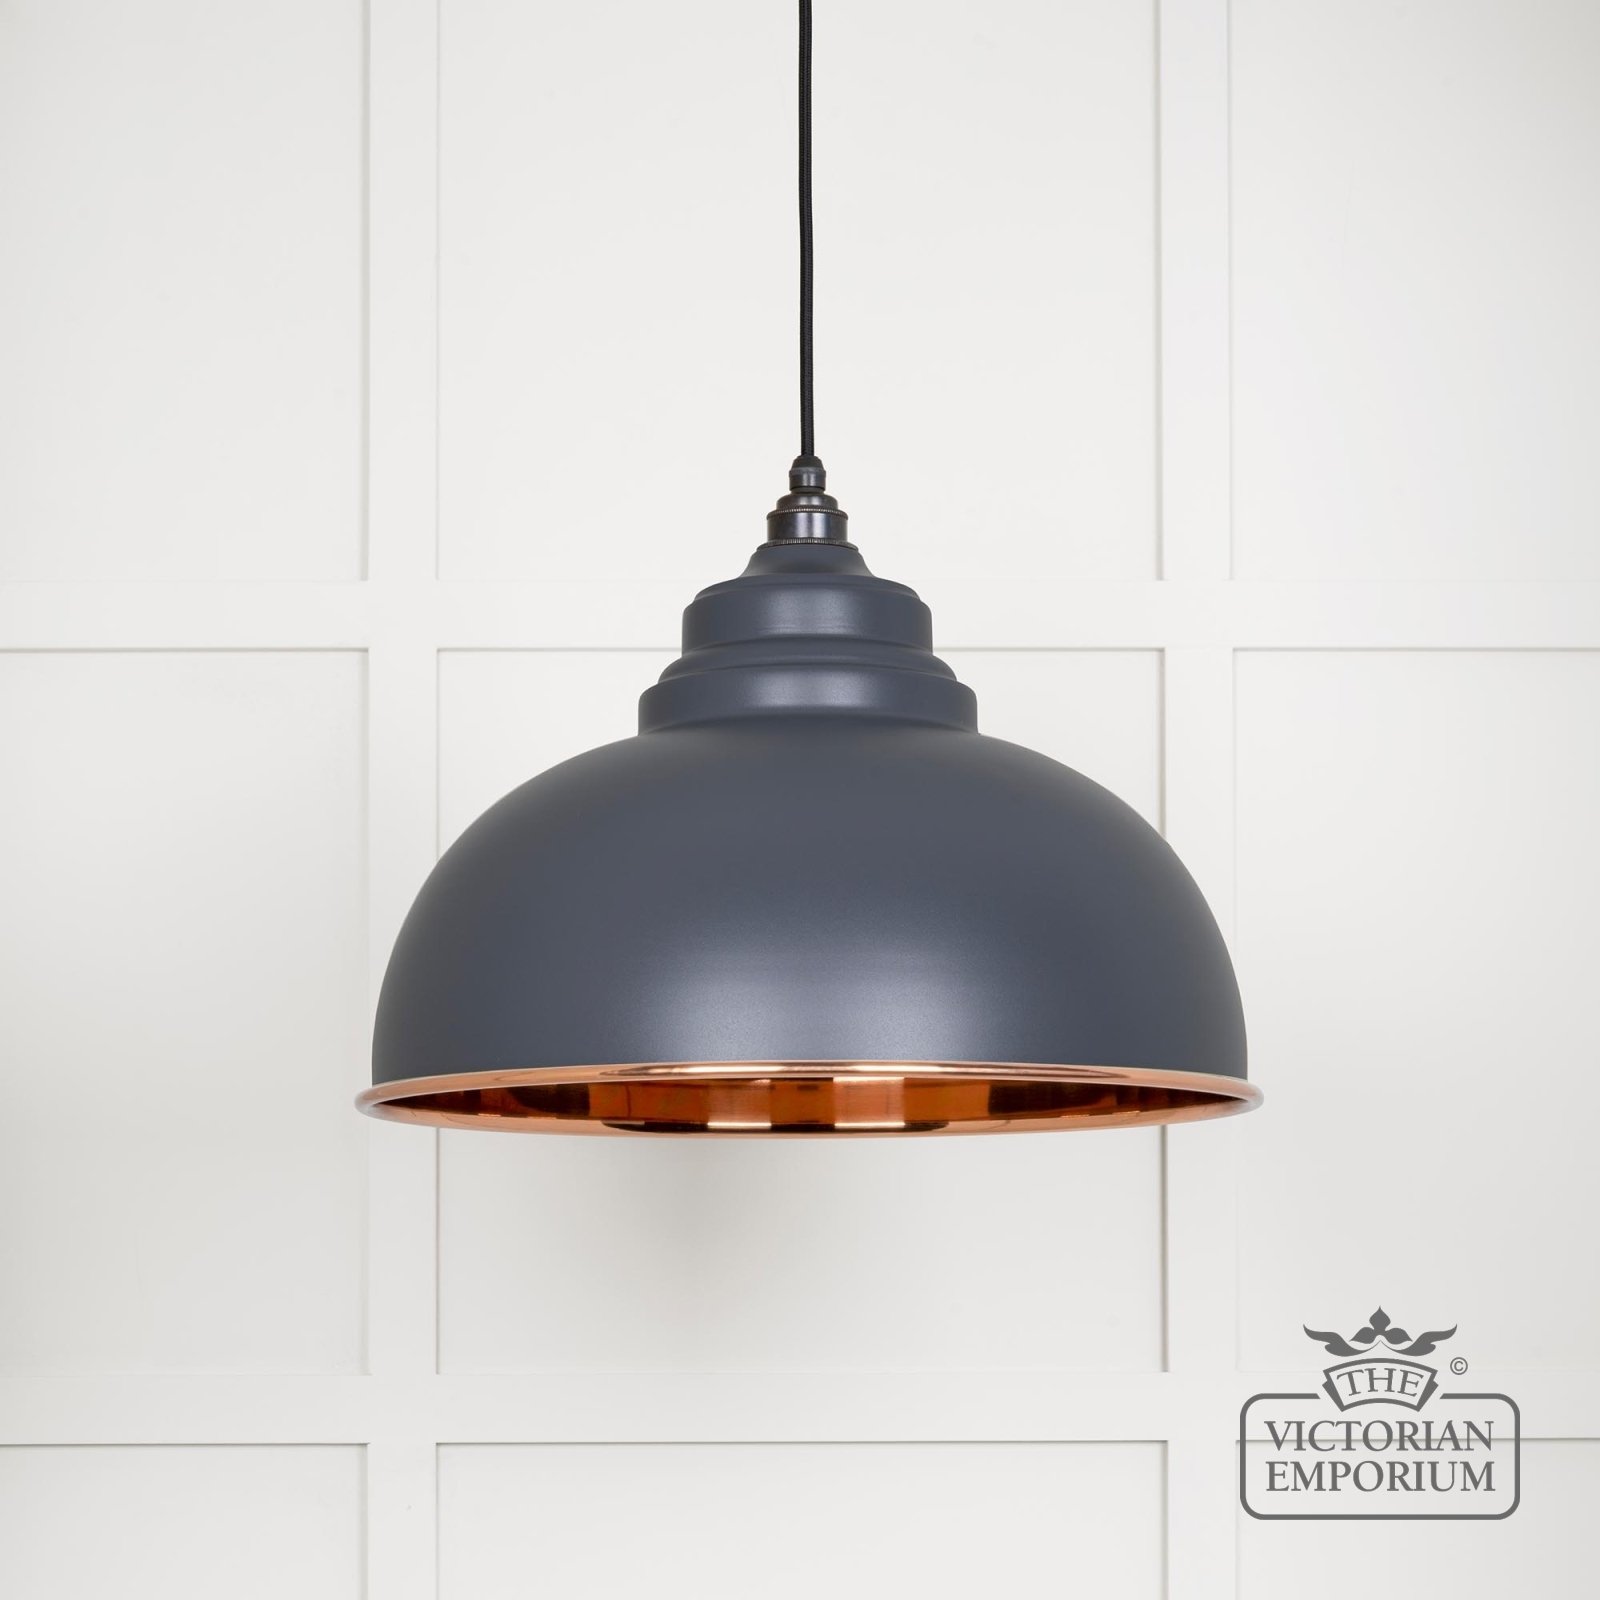 Harlow pendant light in smooth copper with Slate exterior